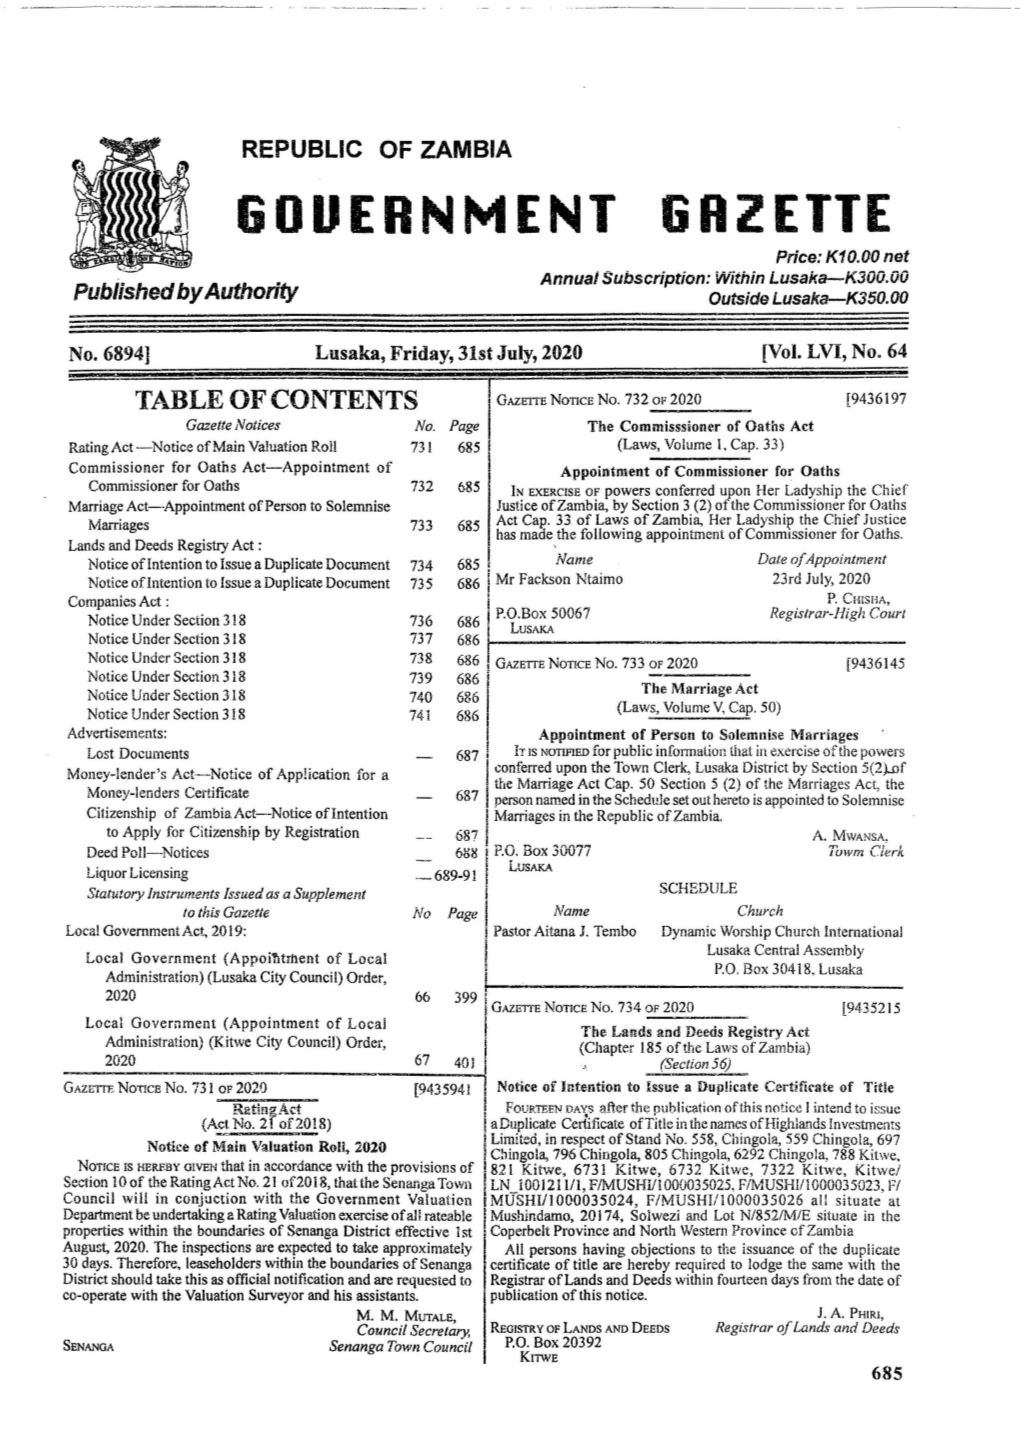 GOVERNMENT GRZETTE Price: K10.00 Net Annual Subscription: Within Lusaka—K300.00 Published by Authority Outside Lusaka—K350.00